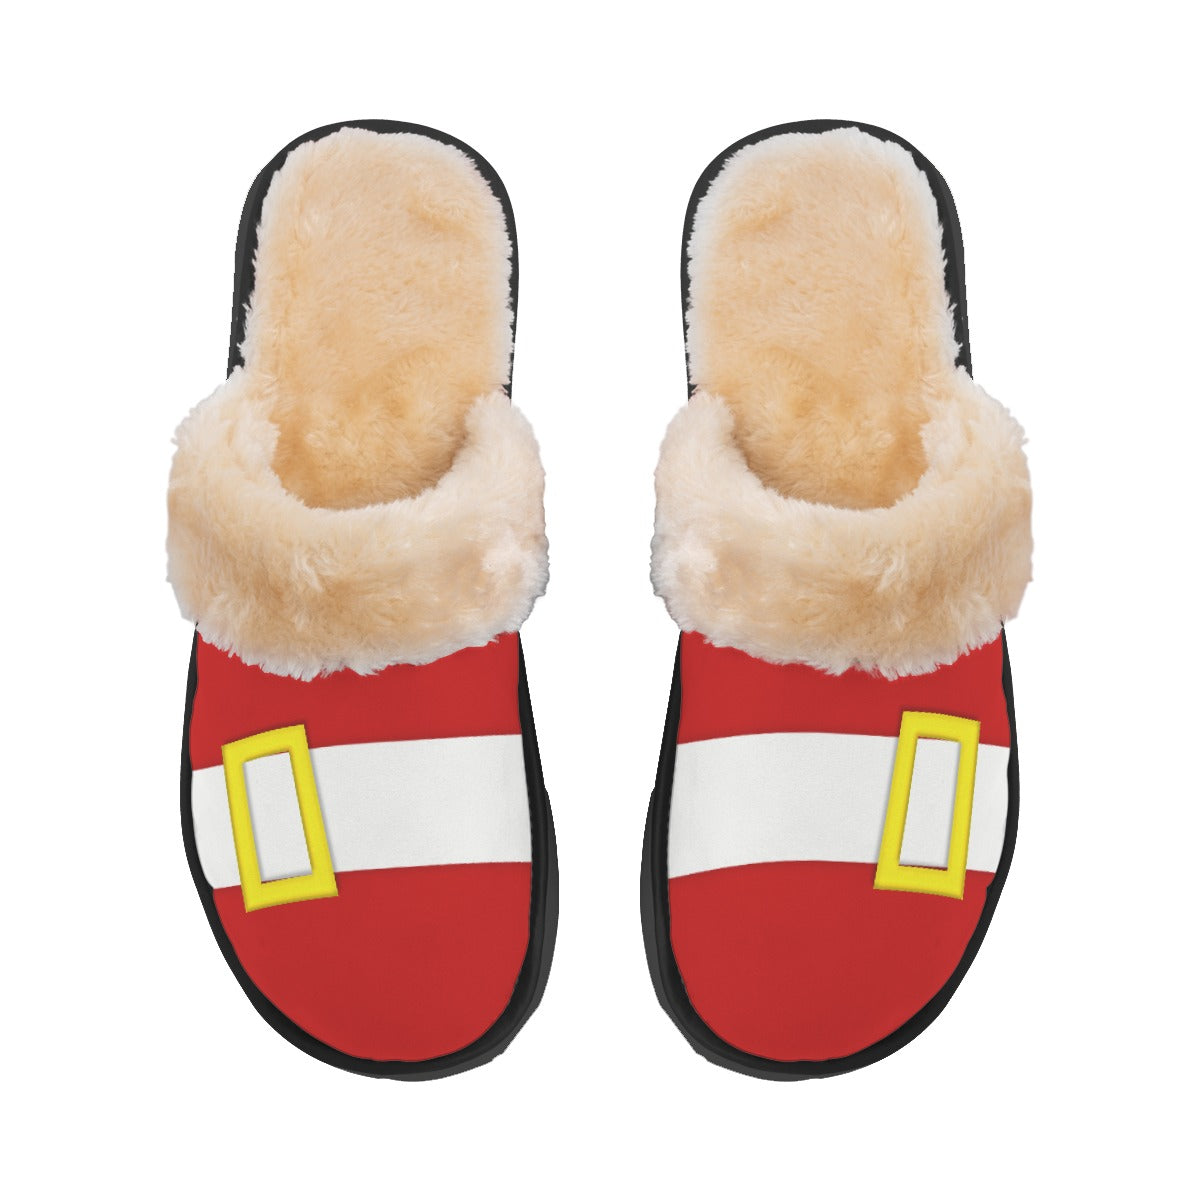 Sonic Buckle Style Adult Plush Slippers